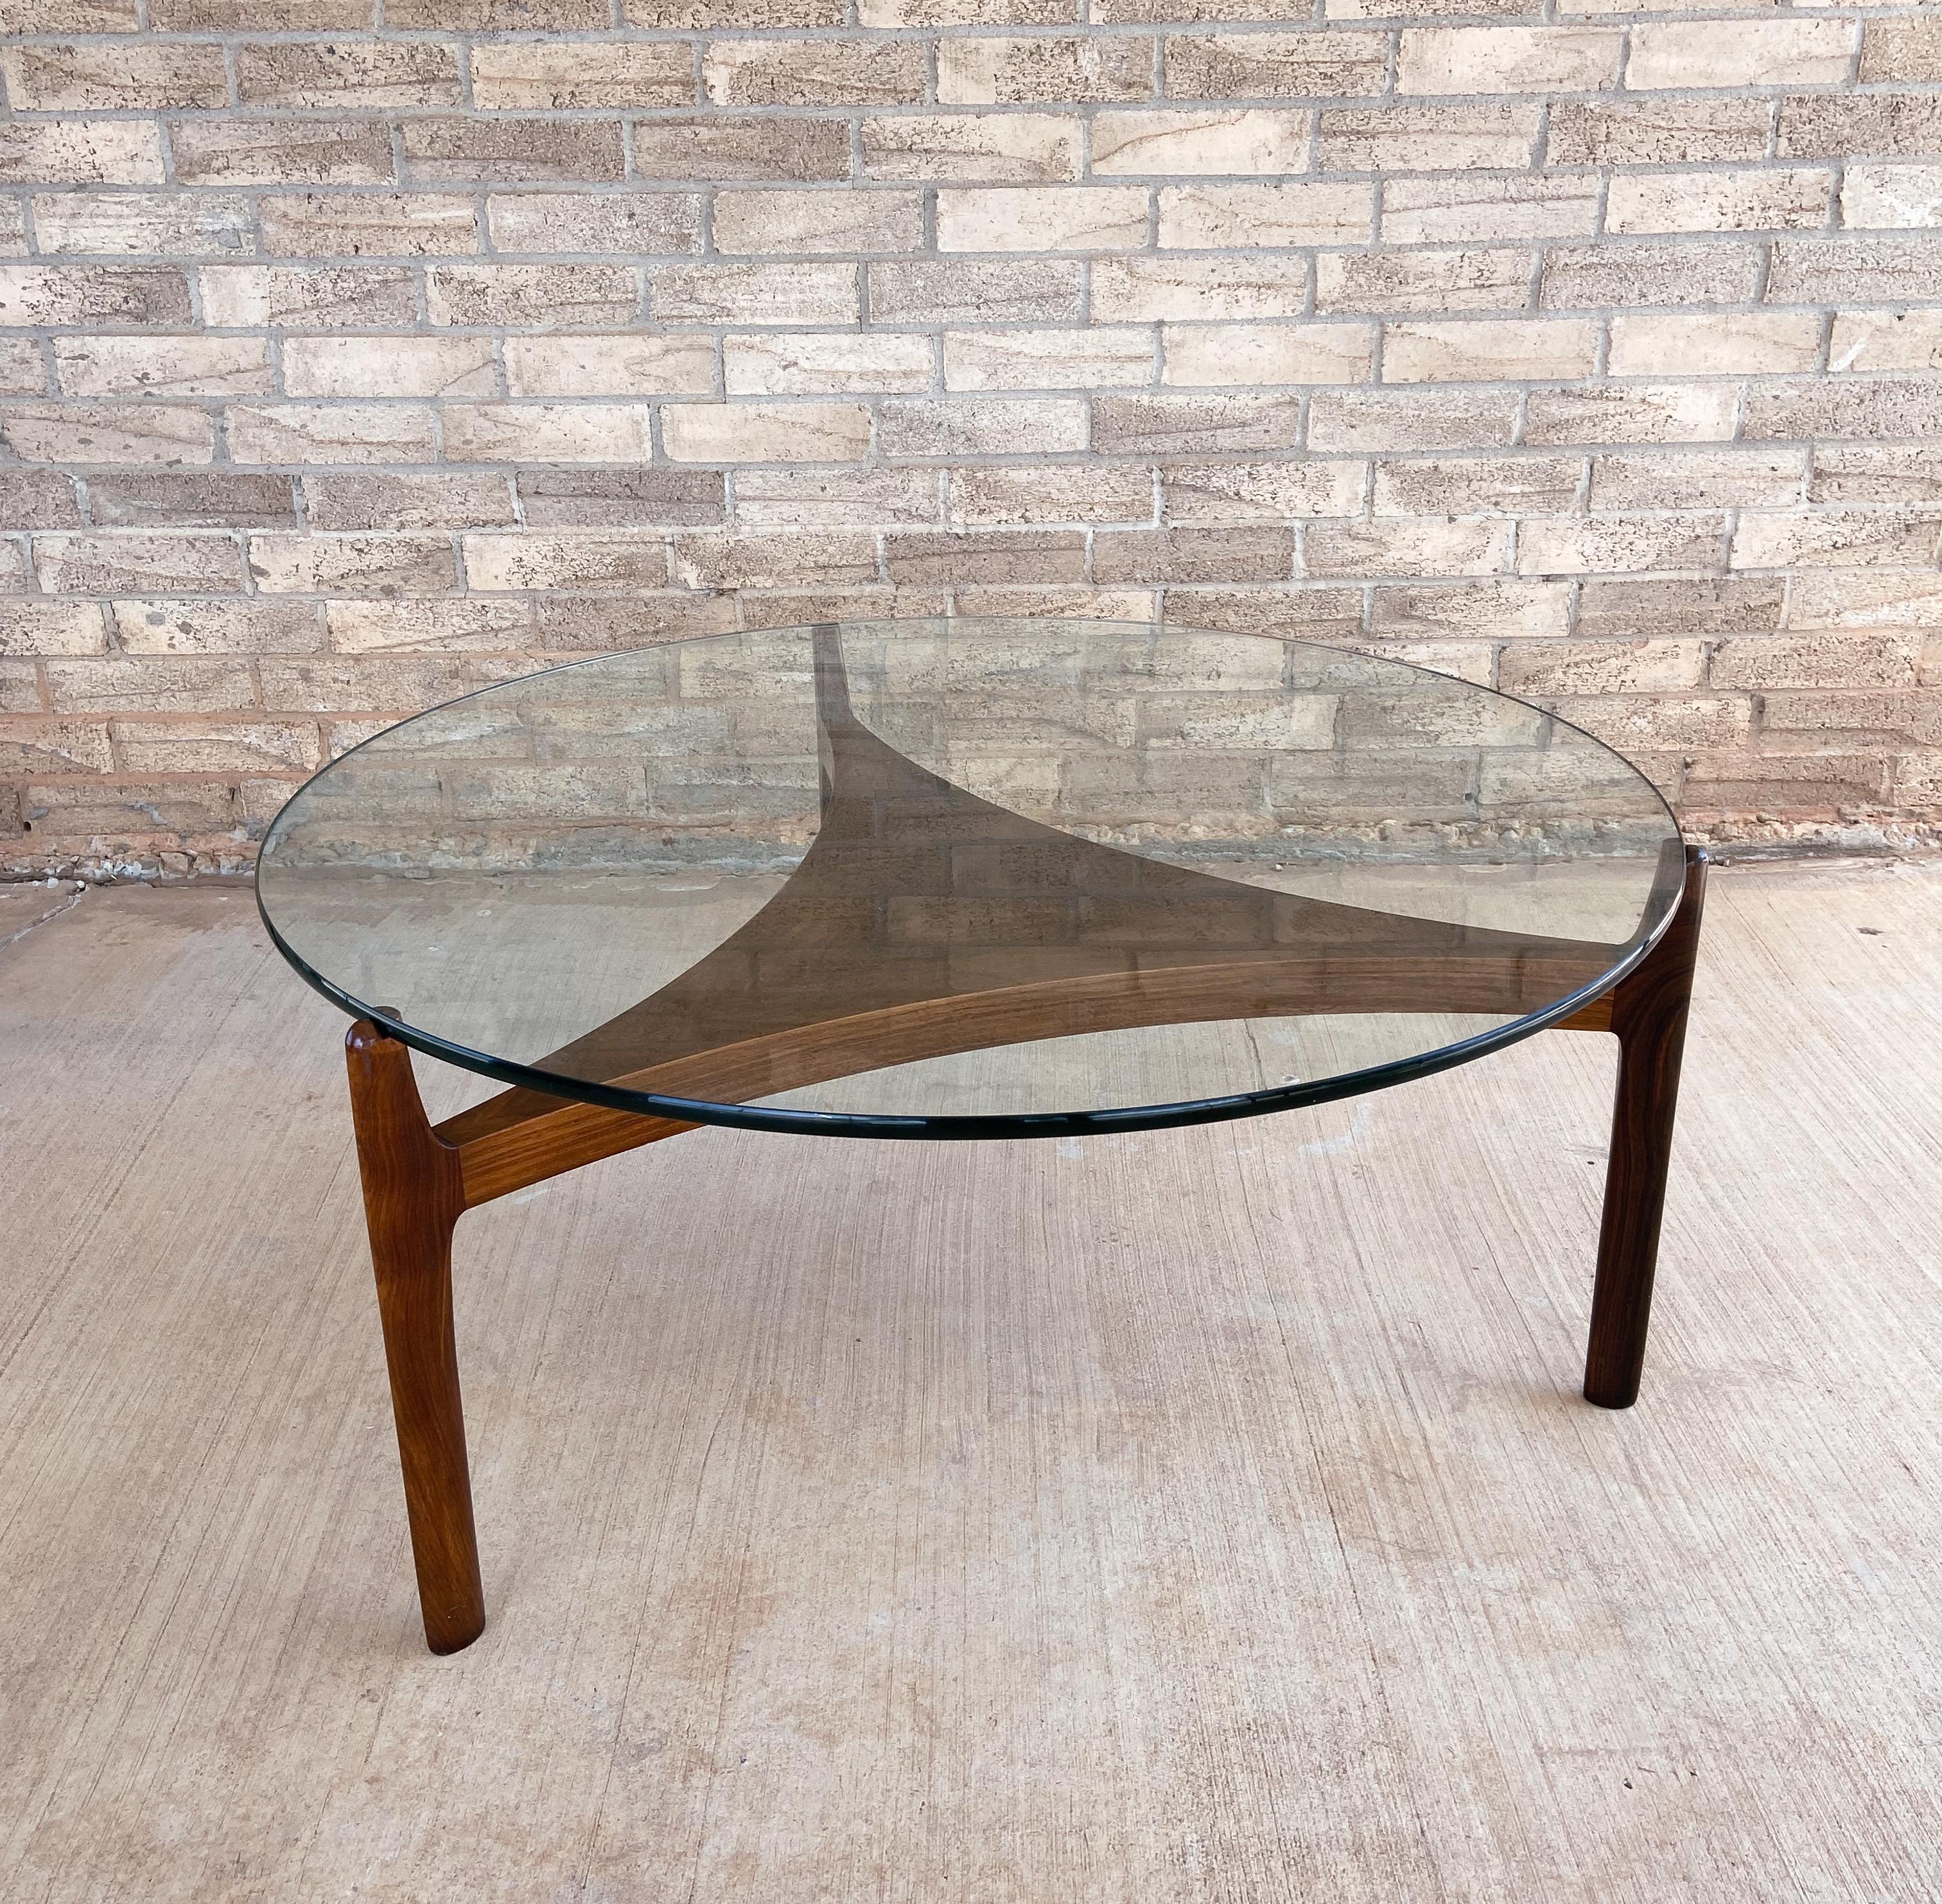 Offered is a lovely, sculpted rosewood coffee/cocktail table designed by Sven Ellekaer and manufactured by Christian Linneberg.

Featuring solid rosewood legs that have stunning grain throughout. There are sculpted notches where the glass rest